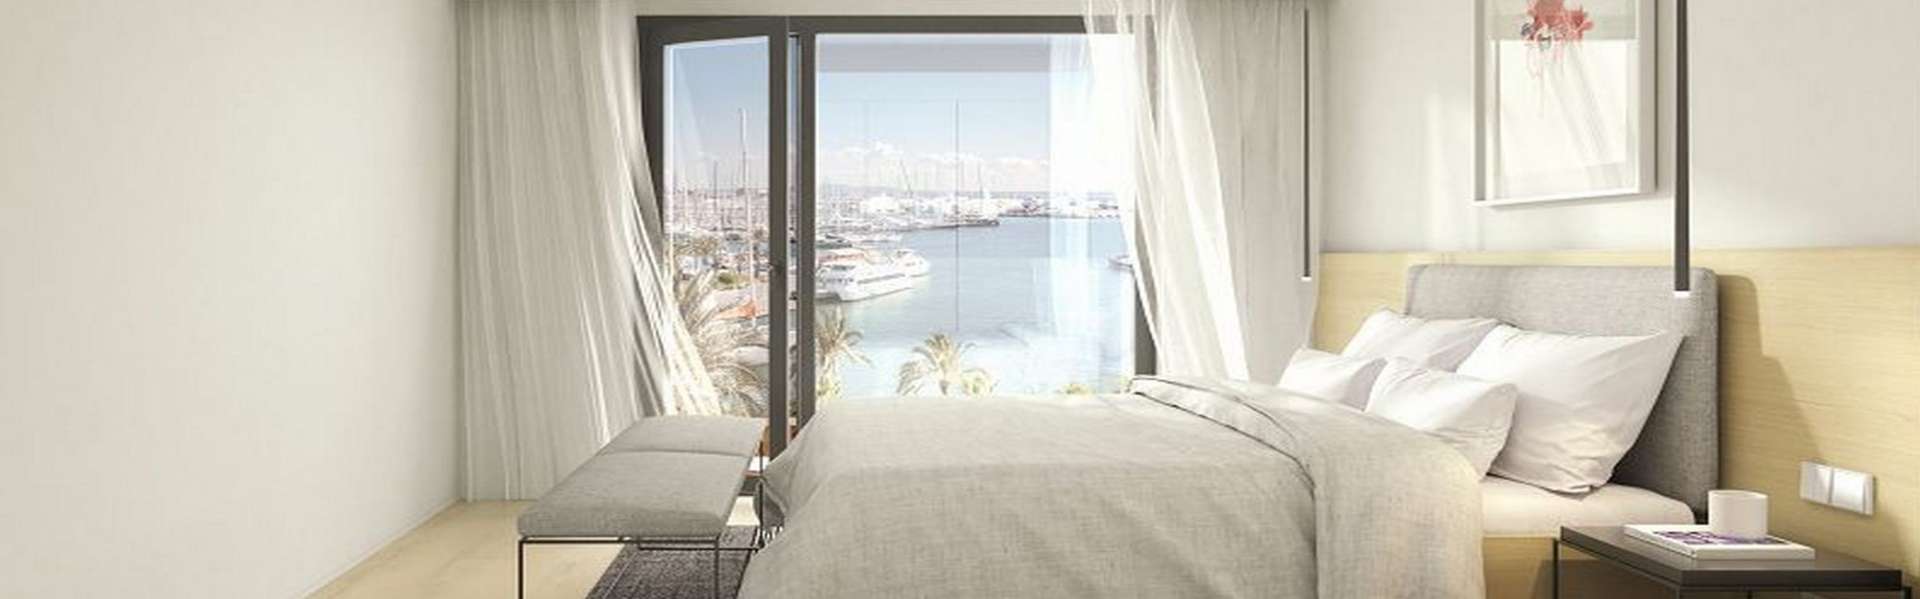 Palma/Paseo Marítimo - Apartment with beautiful views for sale